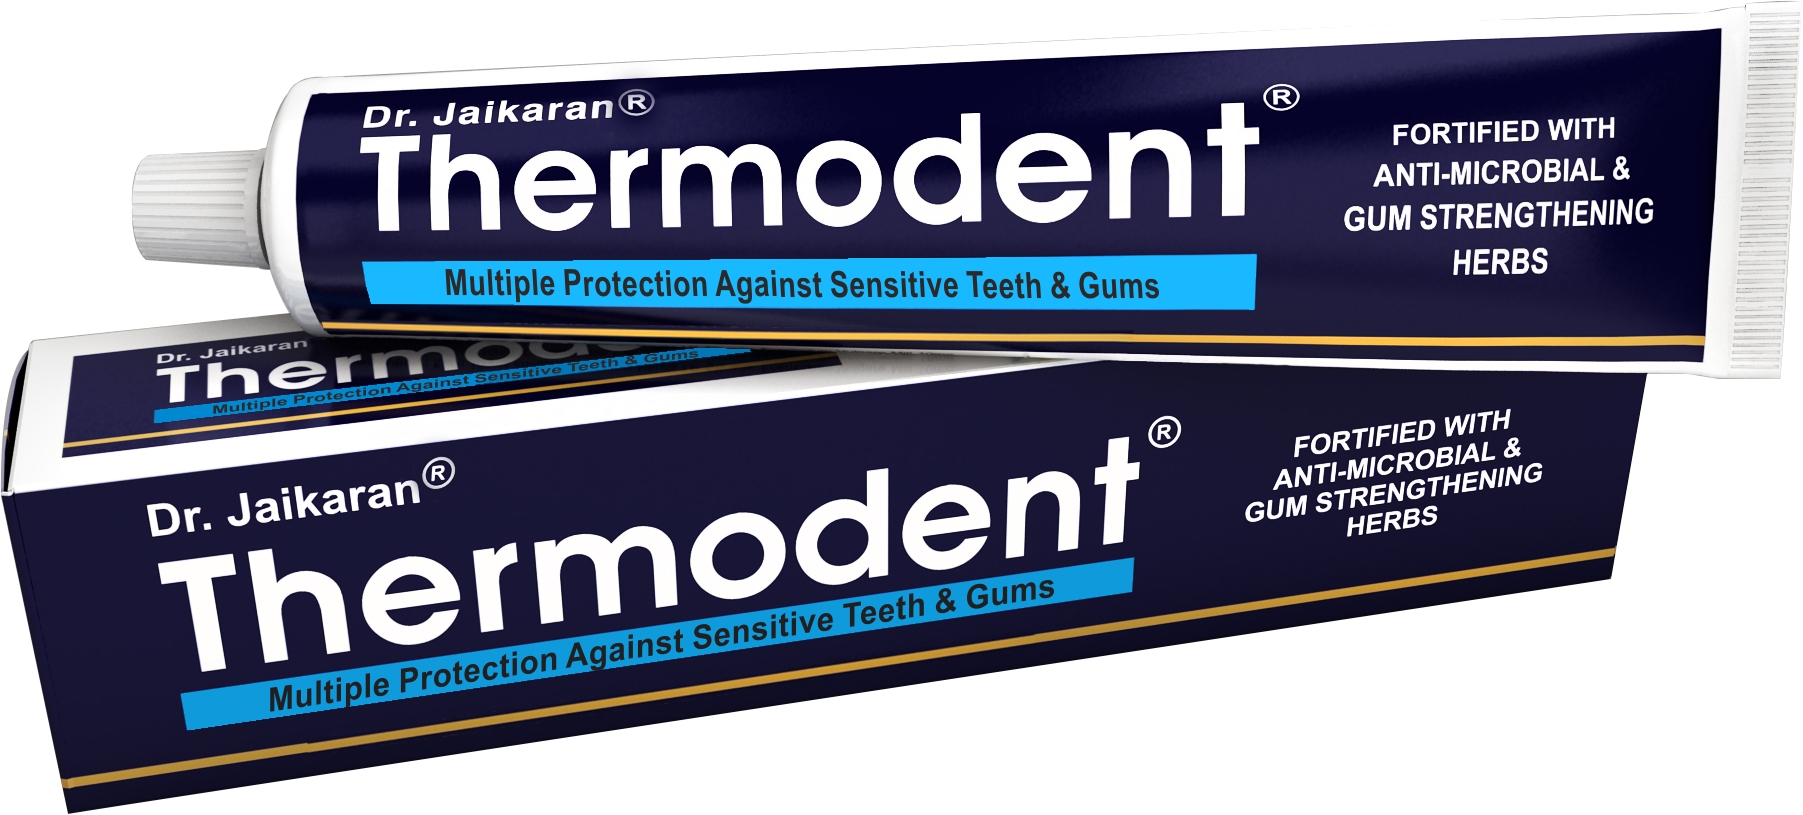 Thermodent Toothpaste